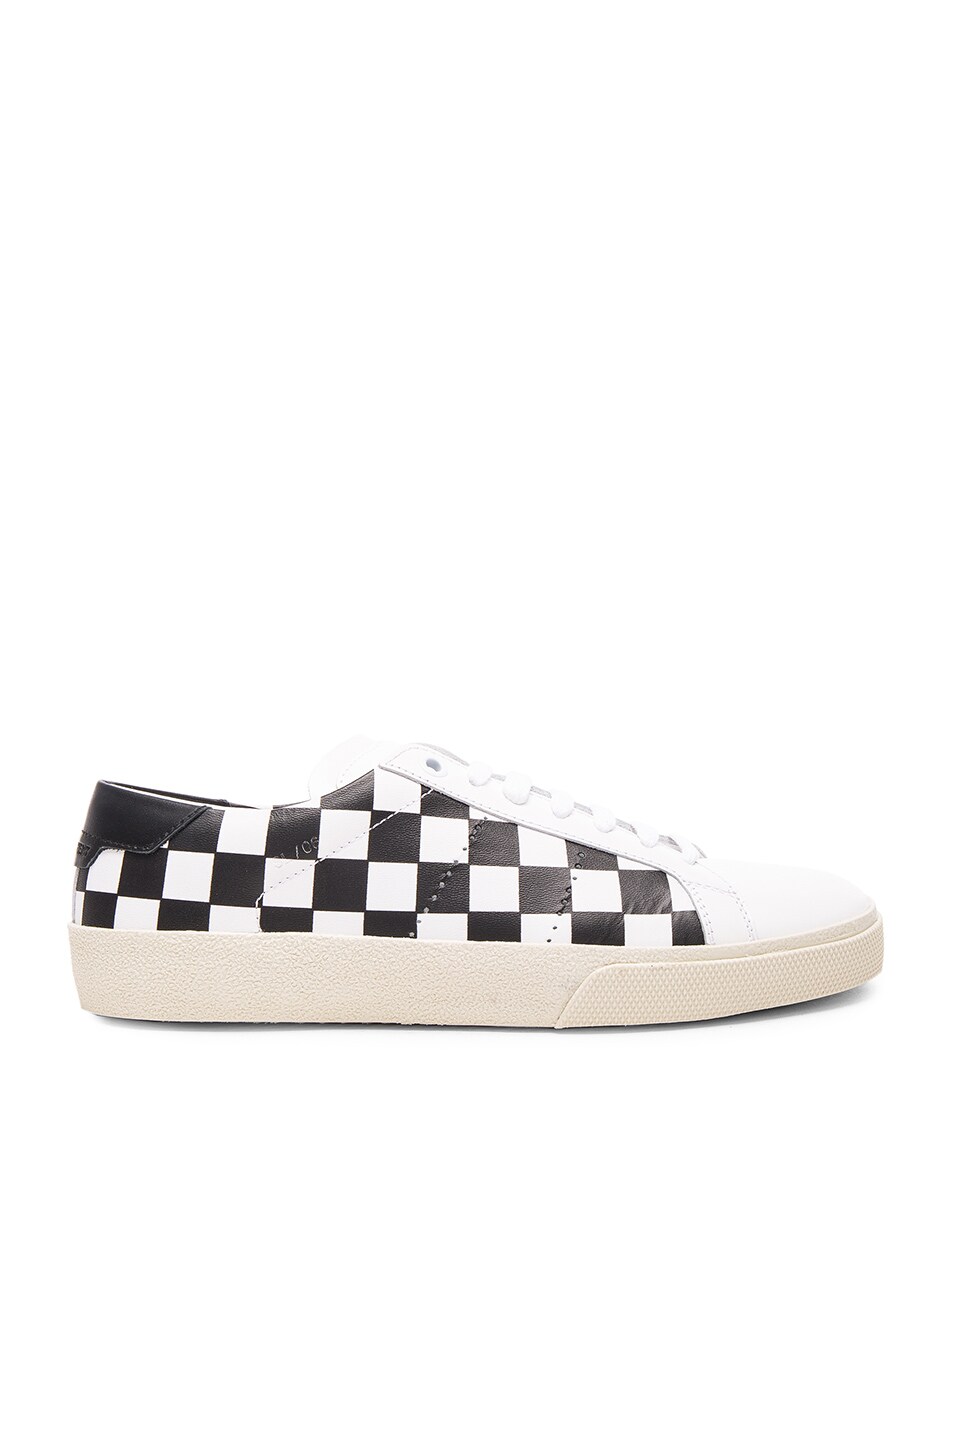 Image 1 of Saint Laurent Court Classic Checkerboard Sneakers in Black & White